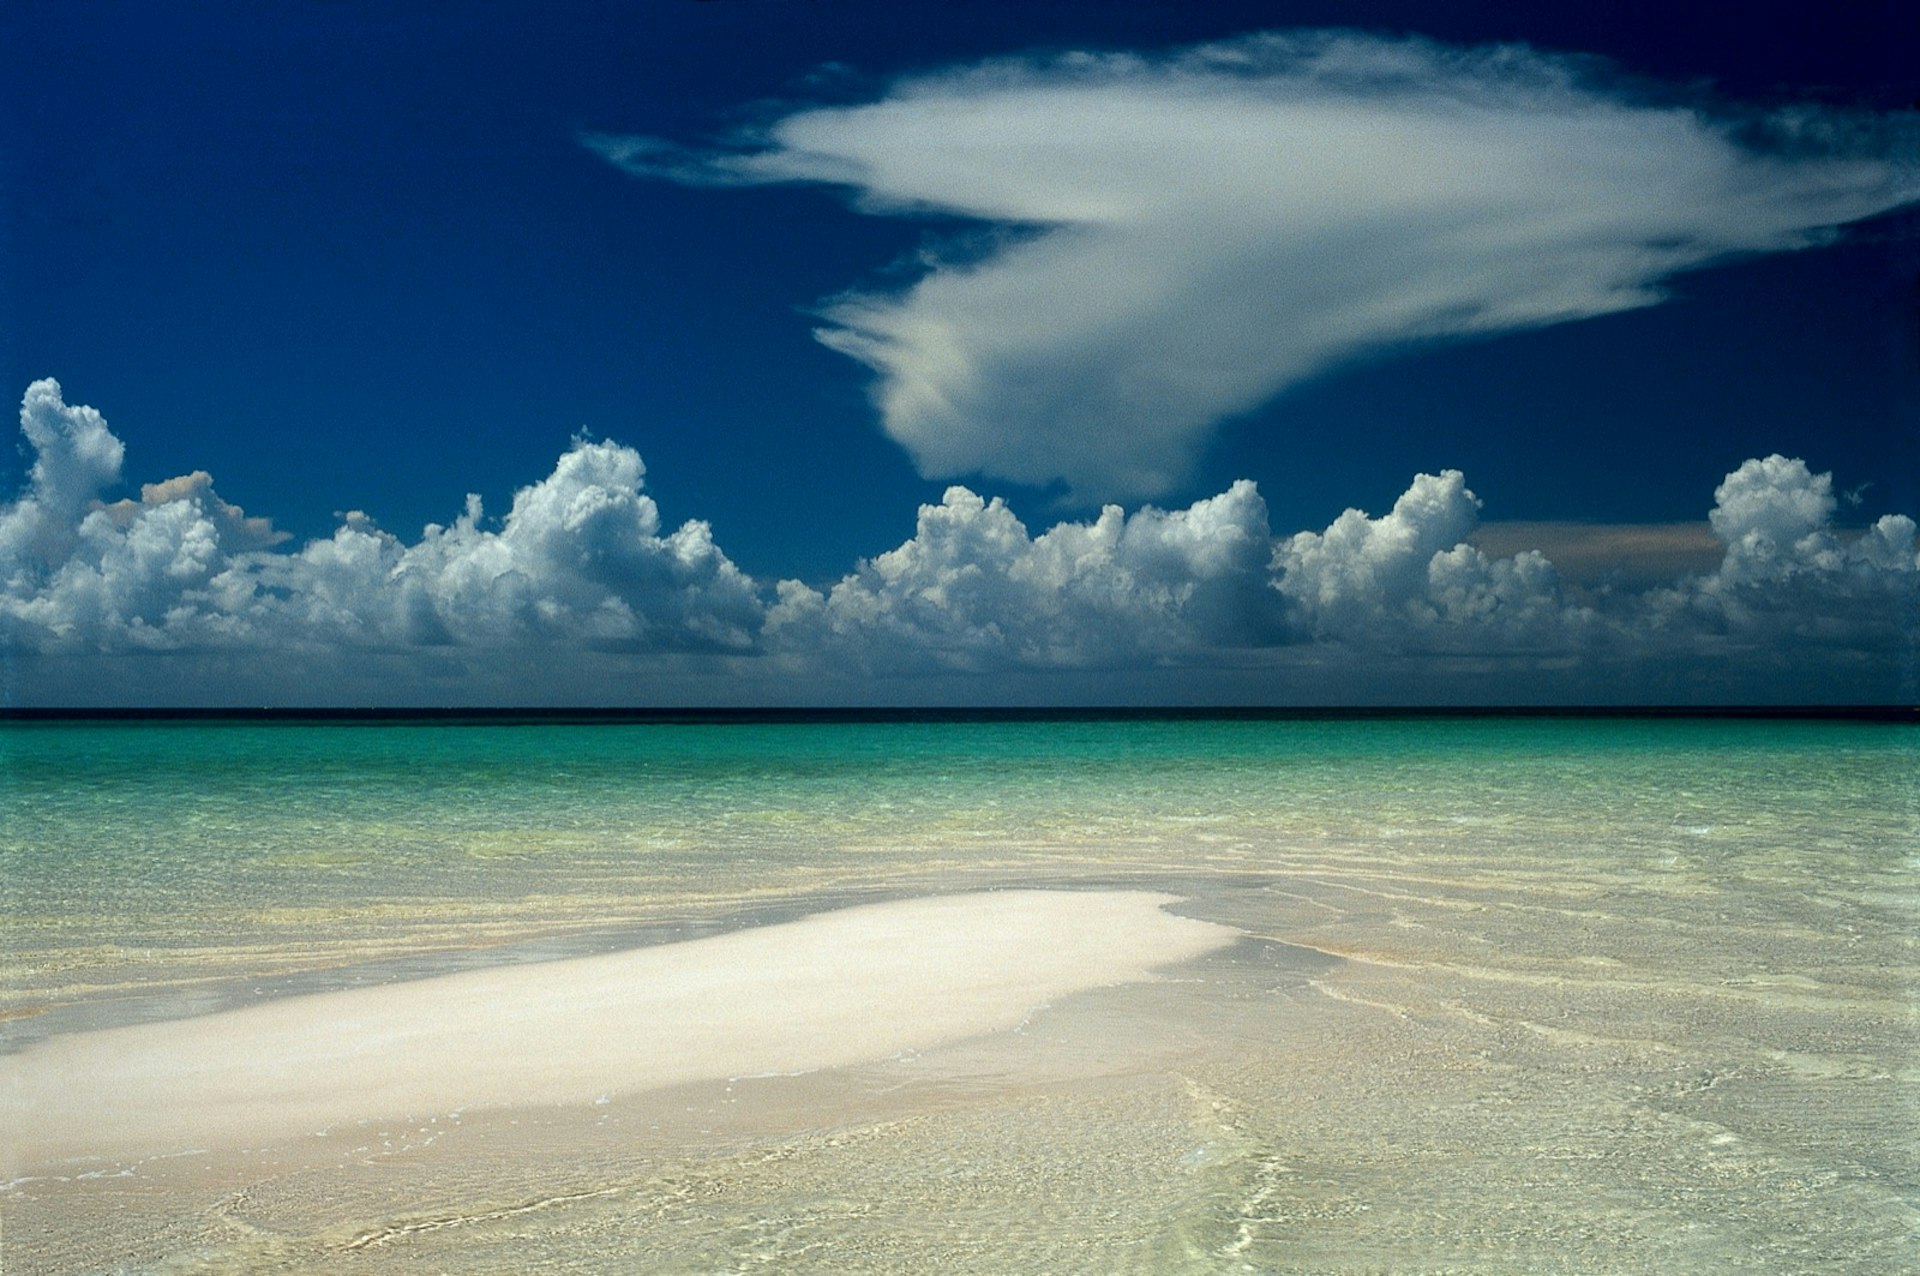 Cayo Coco is known for its white sand beaches and crystal clear waters Marco Cazzato/ 500 pixels 